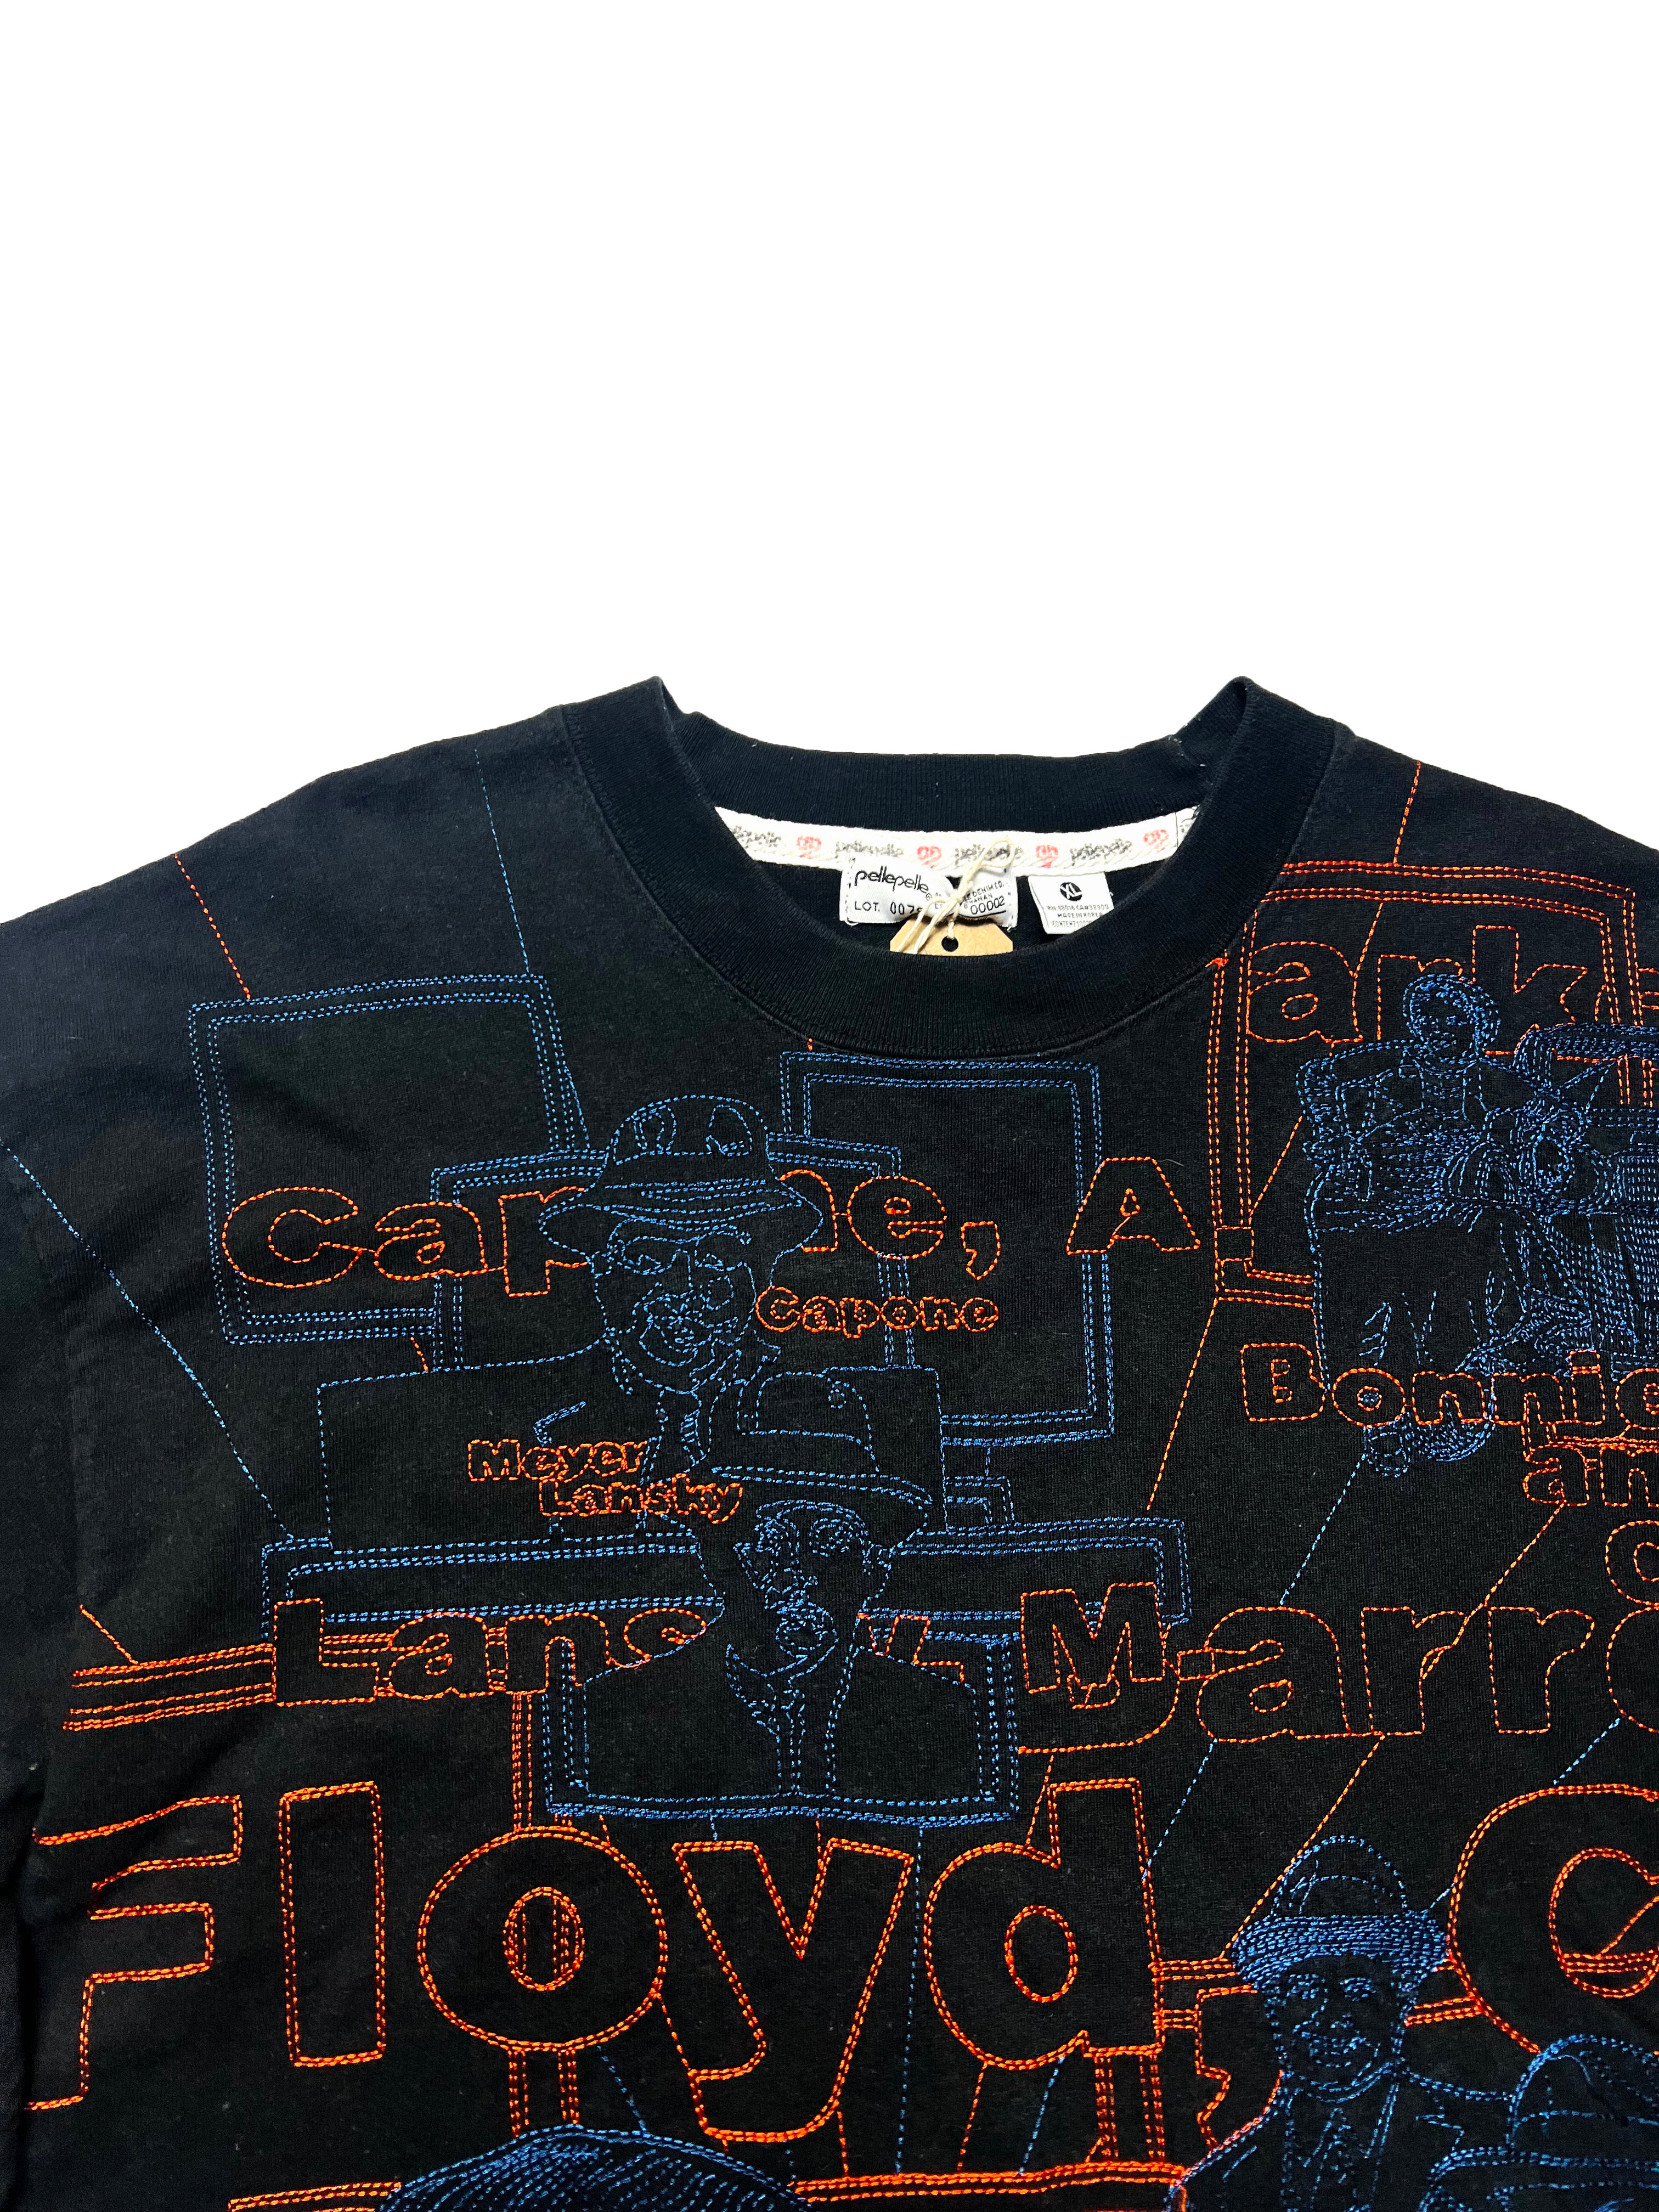 Pelle Pelle 'Gangsters' Embroidered T-shirt 90's